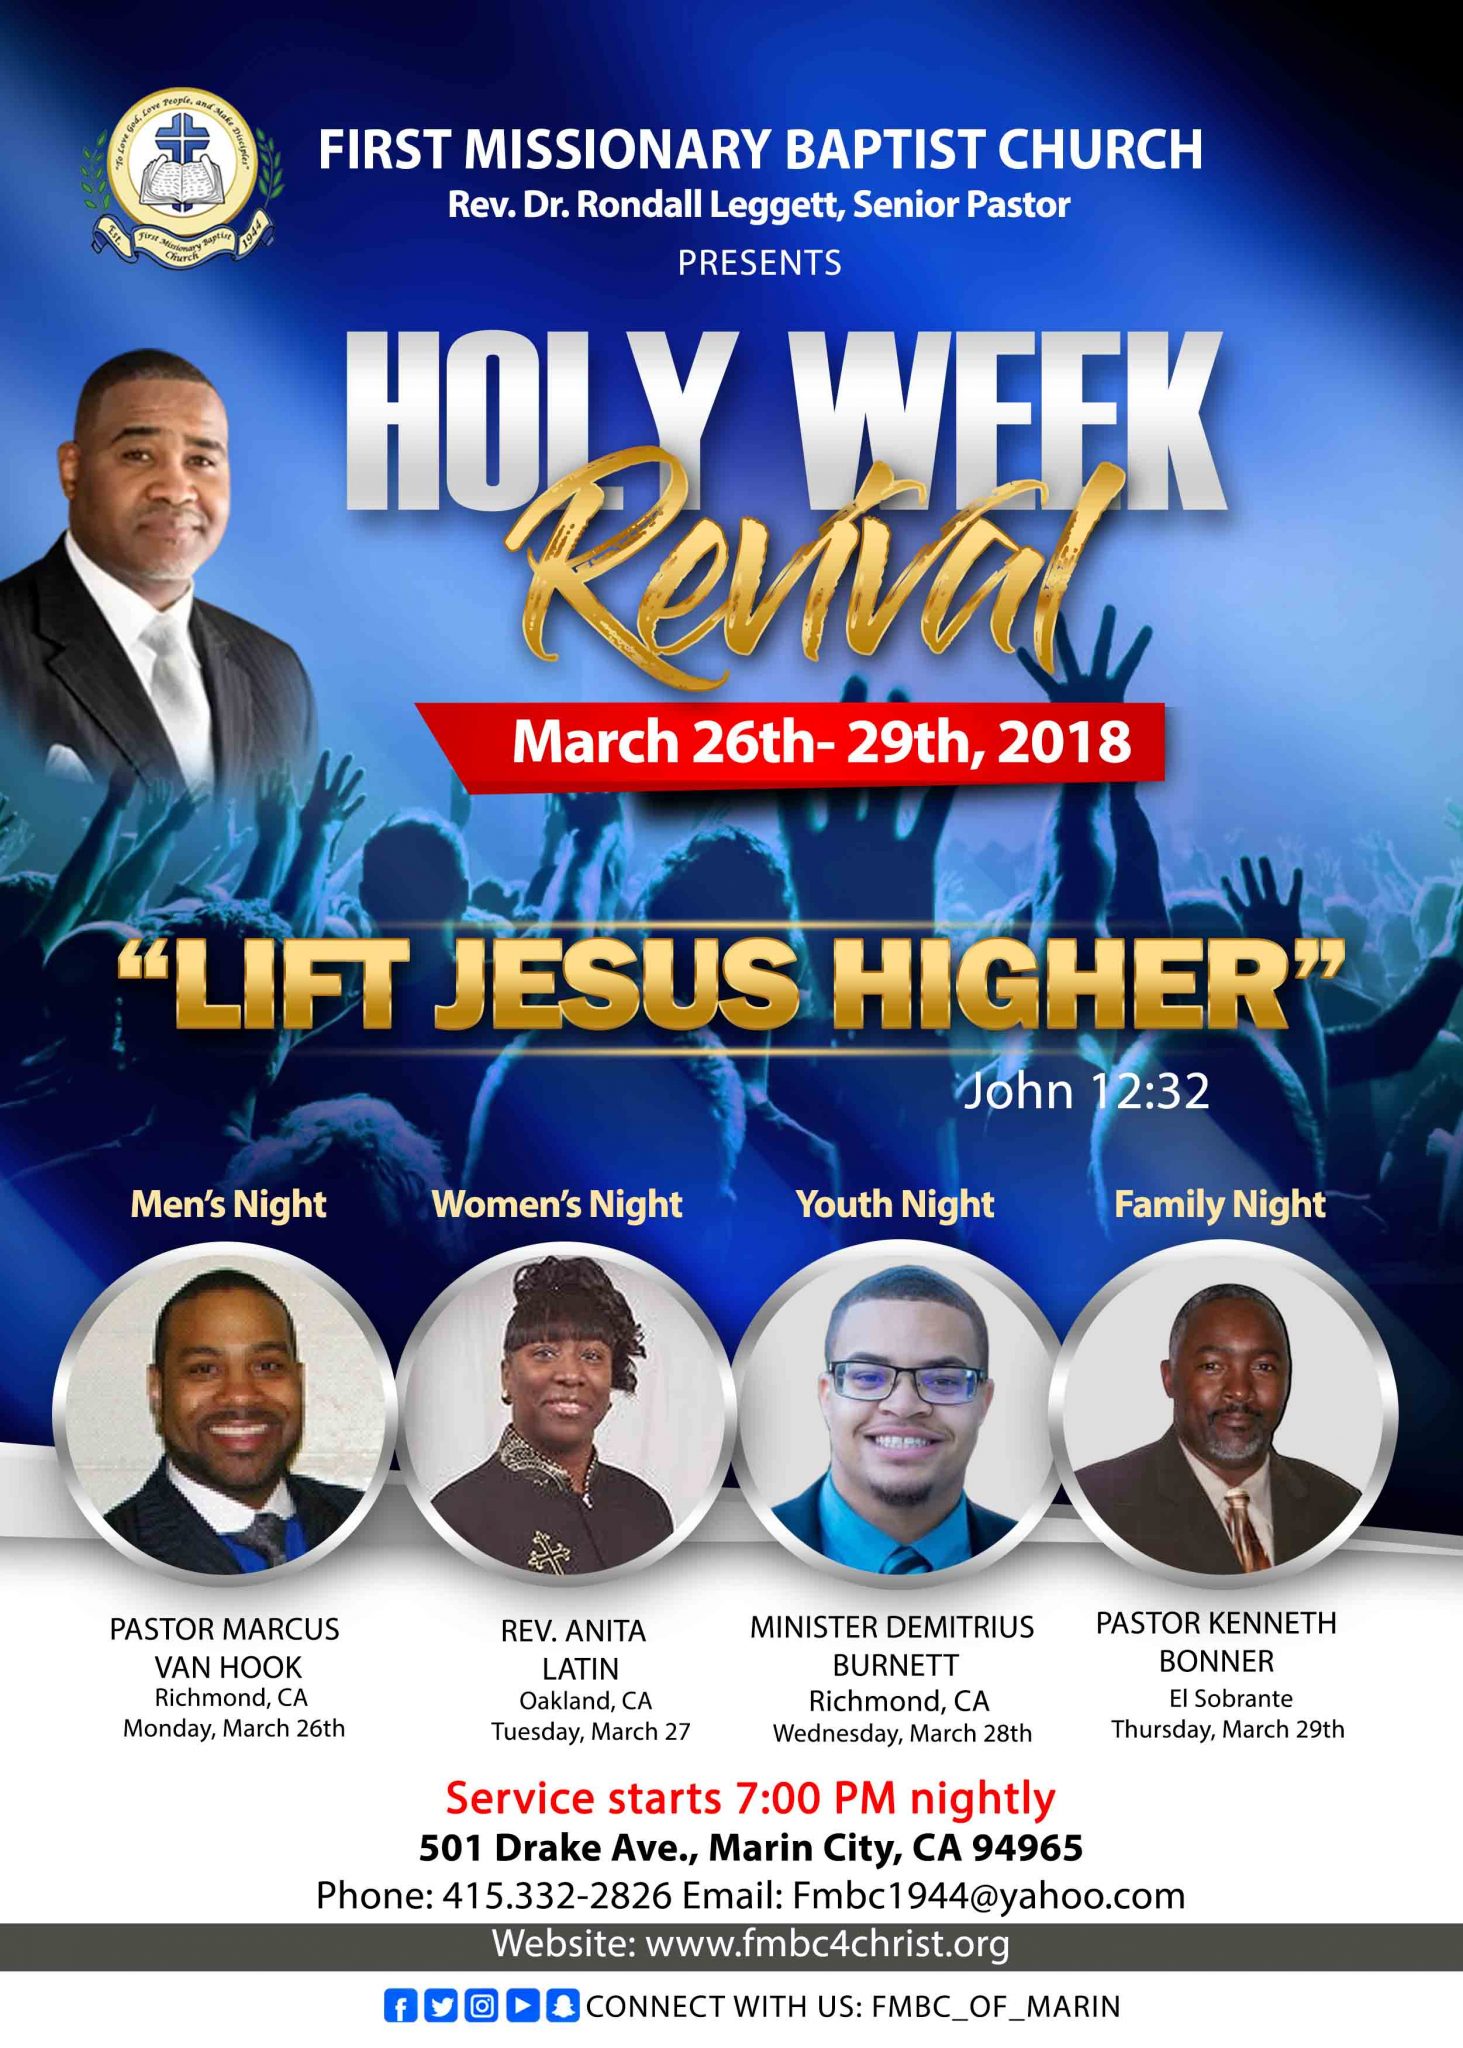 First Missionary Baptist Church Holy Week Revival 2018